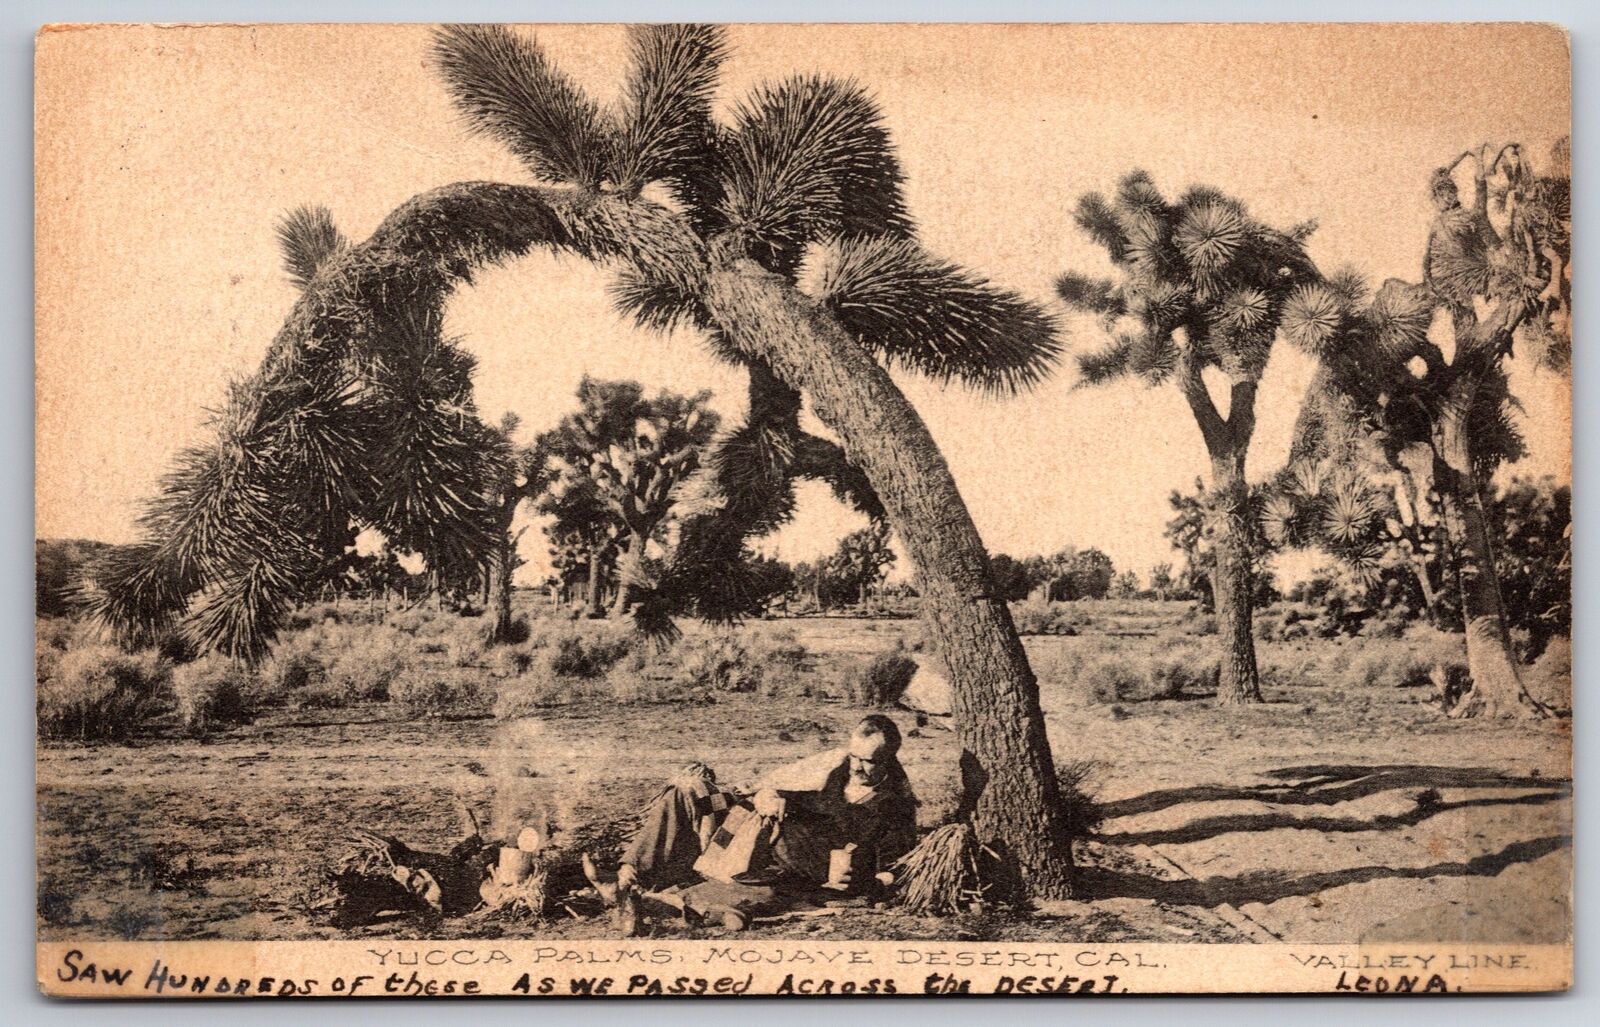 Mojave Desert California~Hobo By Camp Fire Under Yucca Palms~Valley Line~1908 